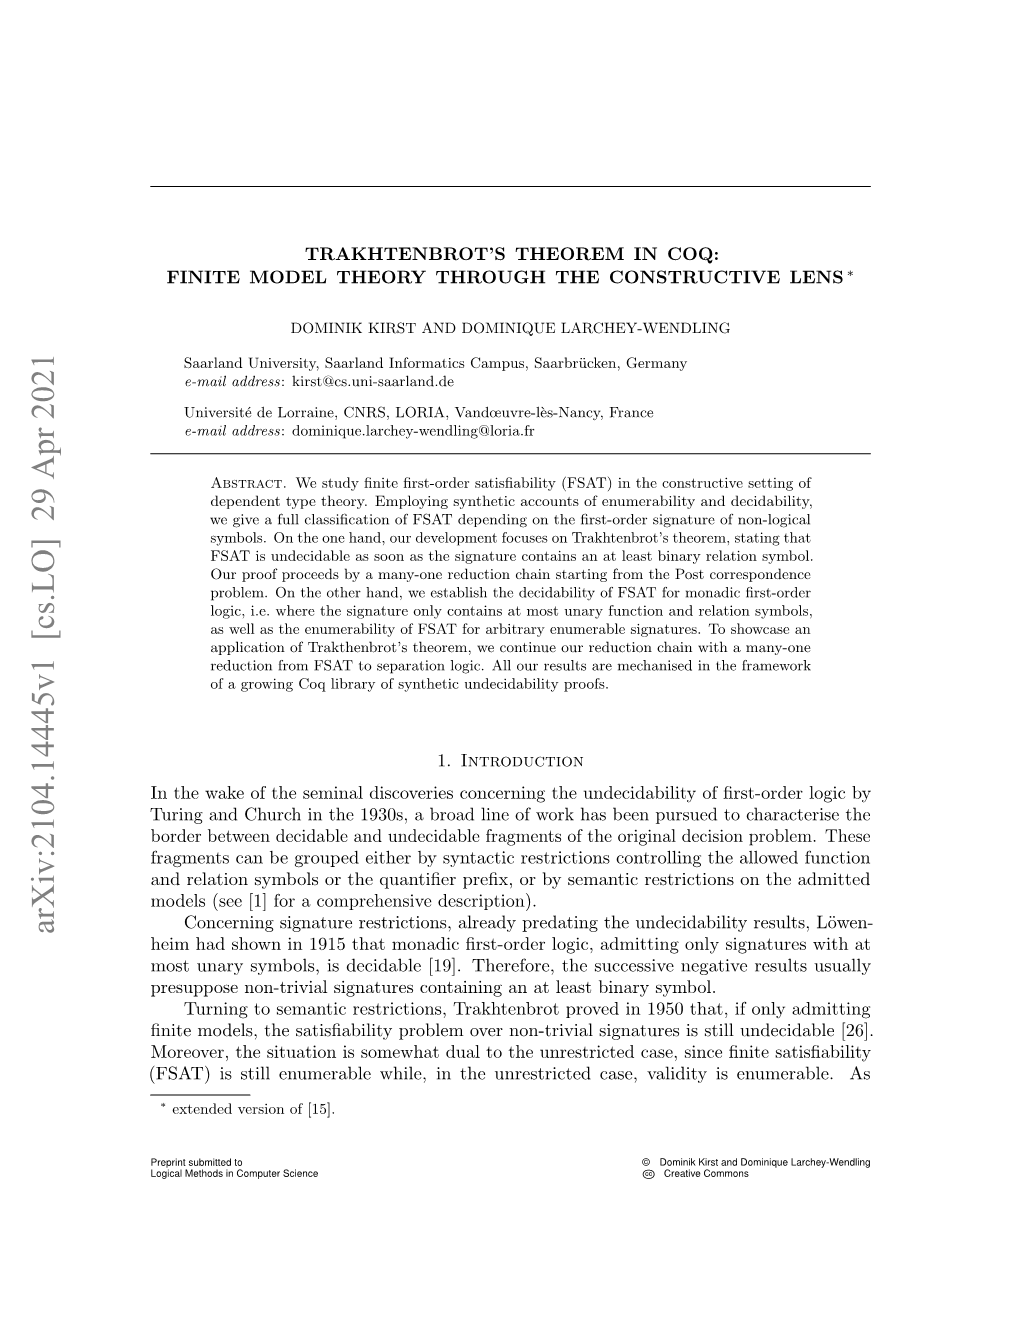 Trakhtenbrot's Theorem in Coq: Finite Model Theory Through The